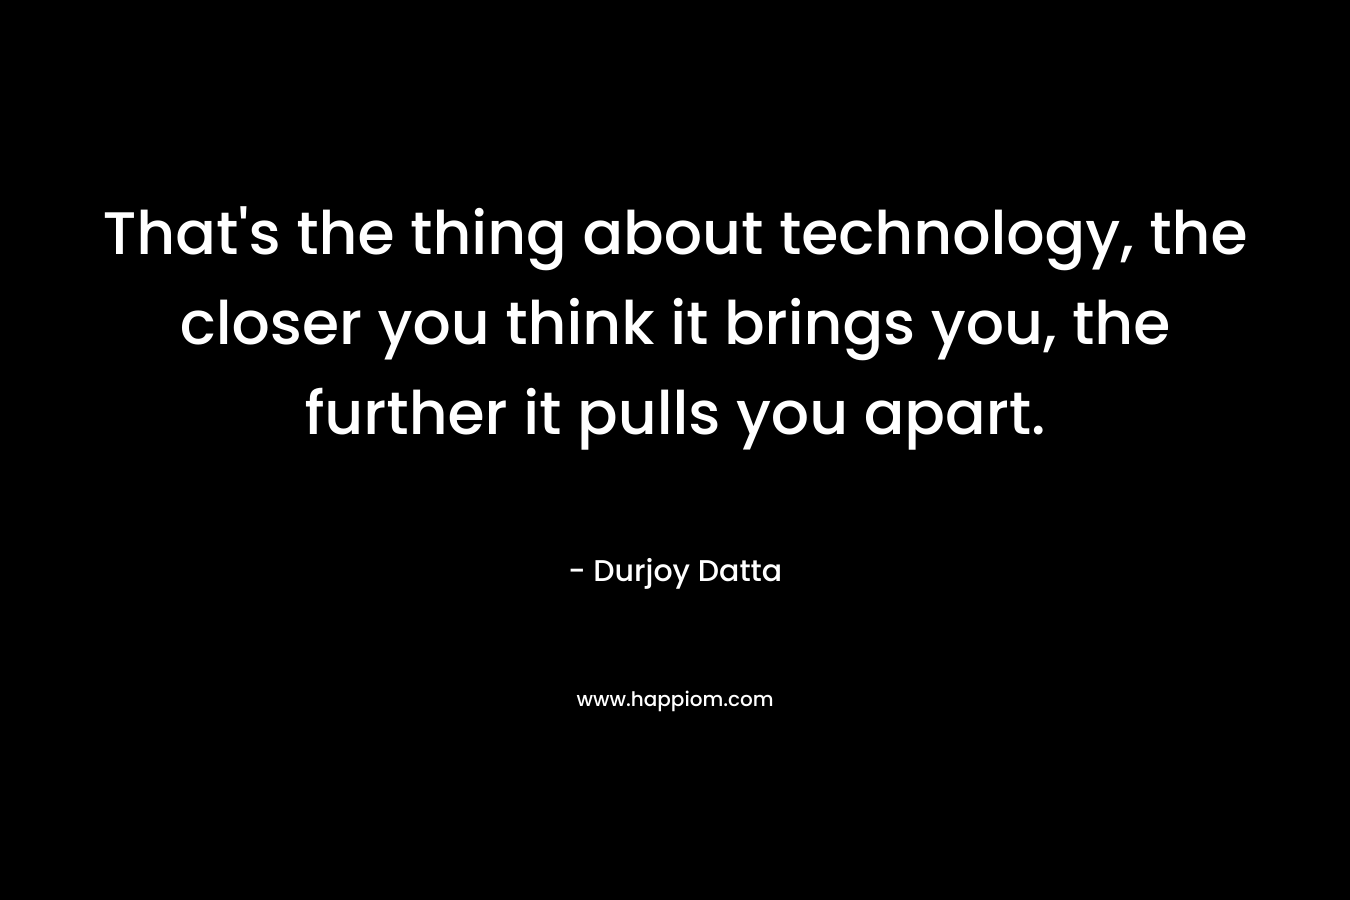 That’s the thing about technology, the closer you think it brings you, the further it pulls you apart. – Durjoy Datta